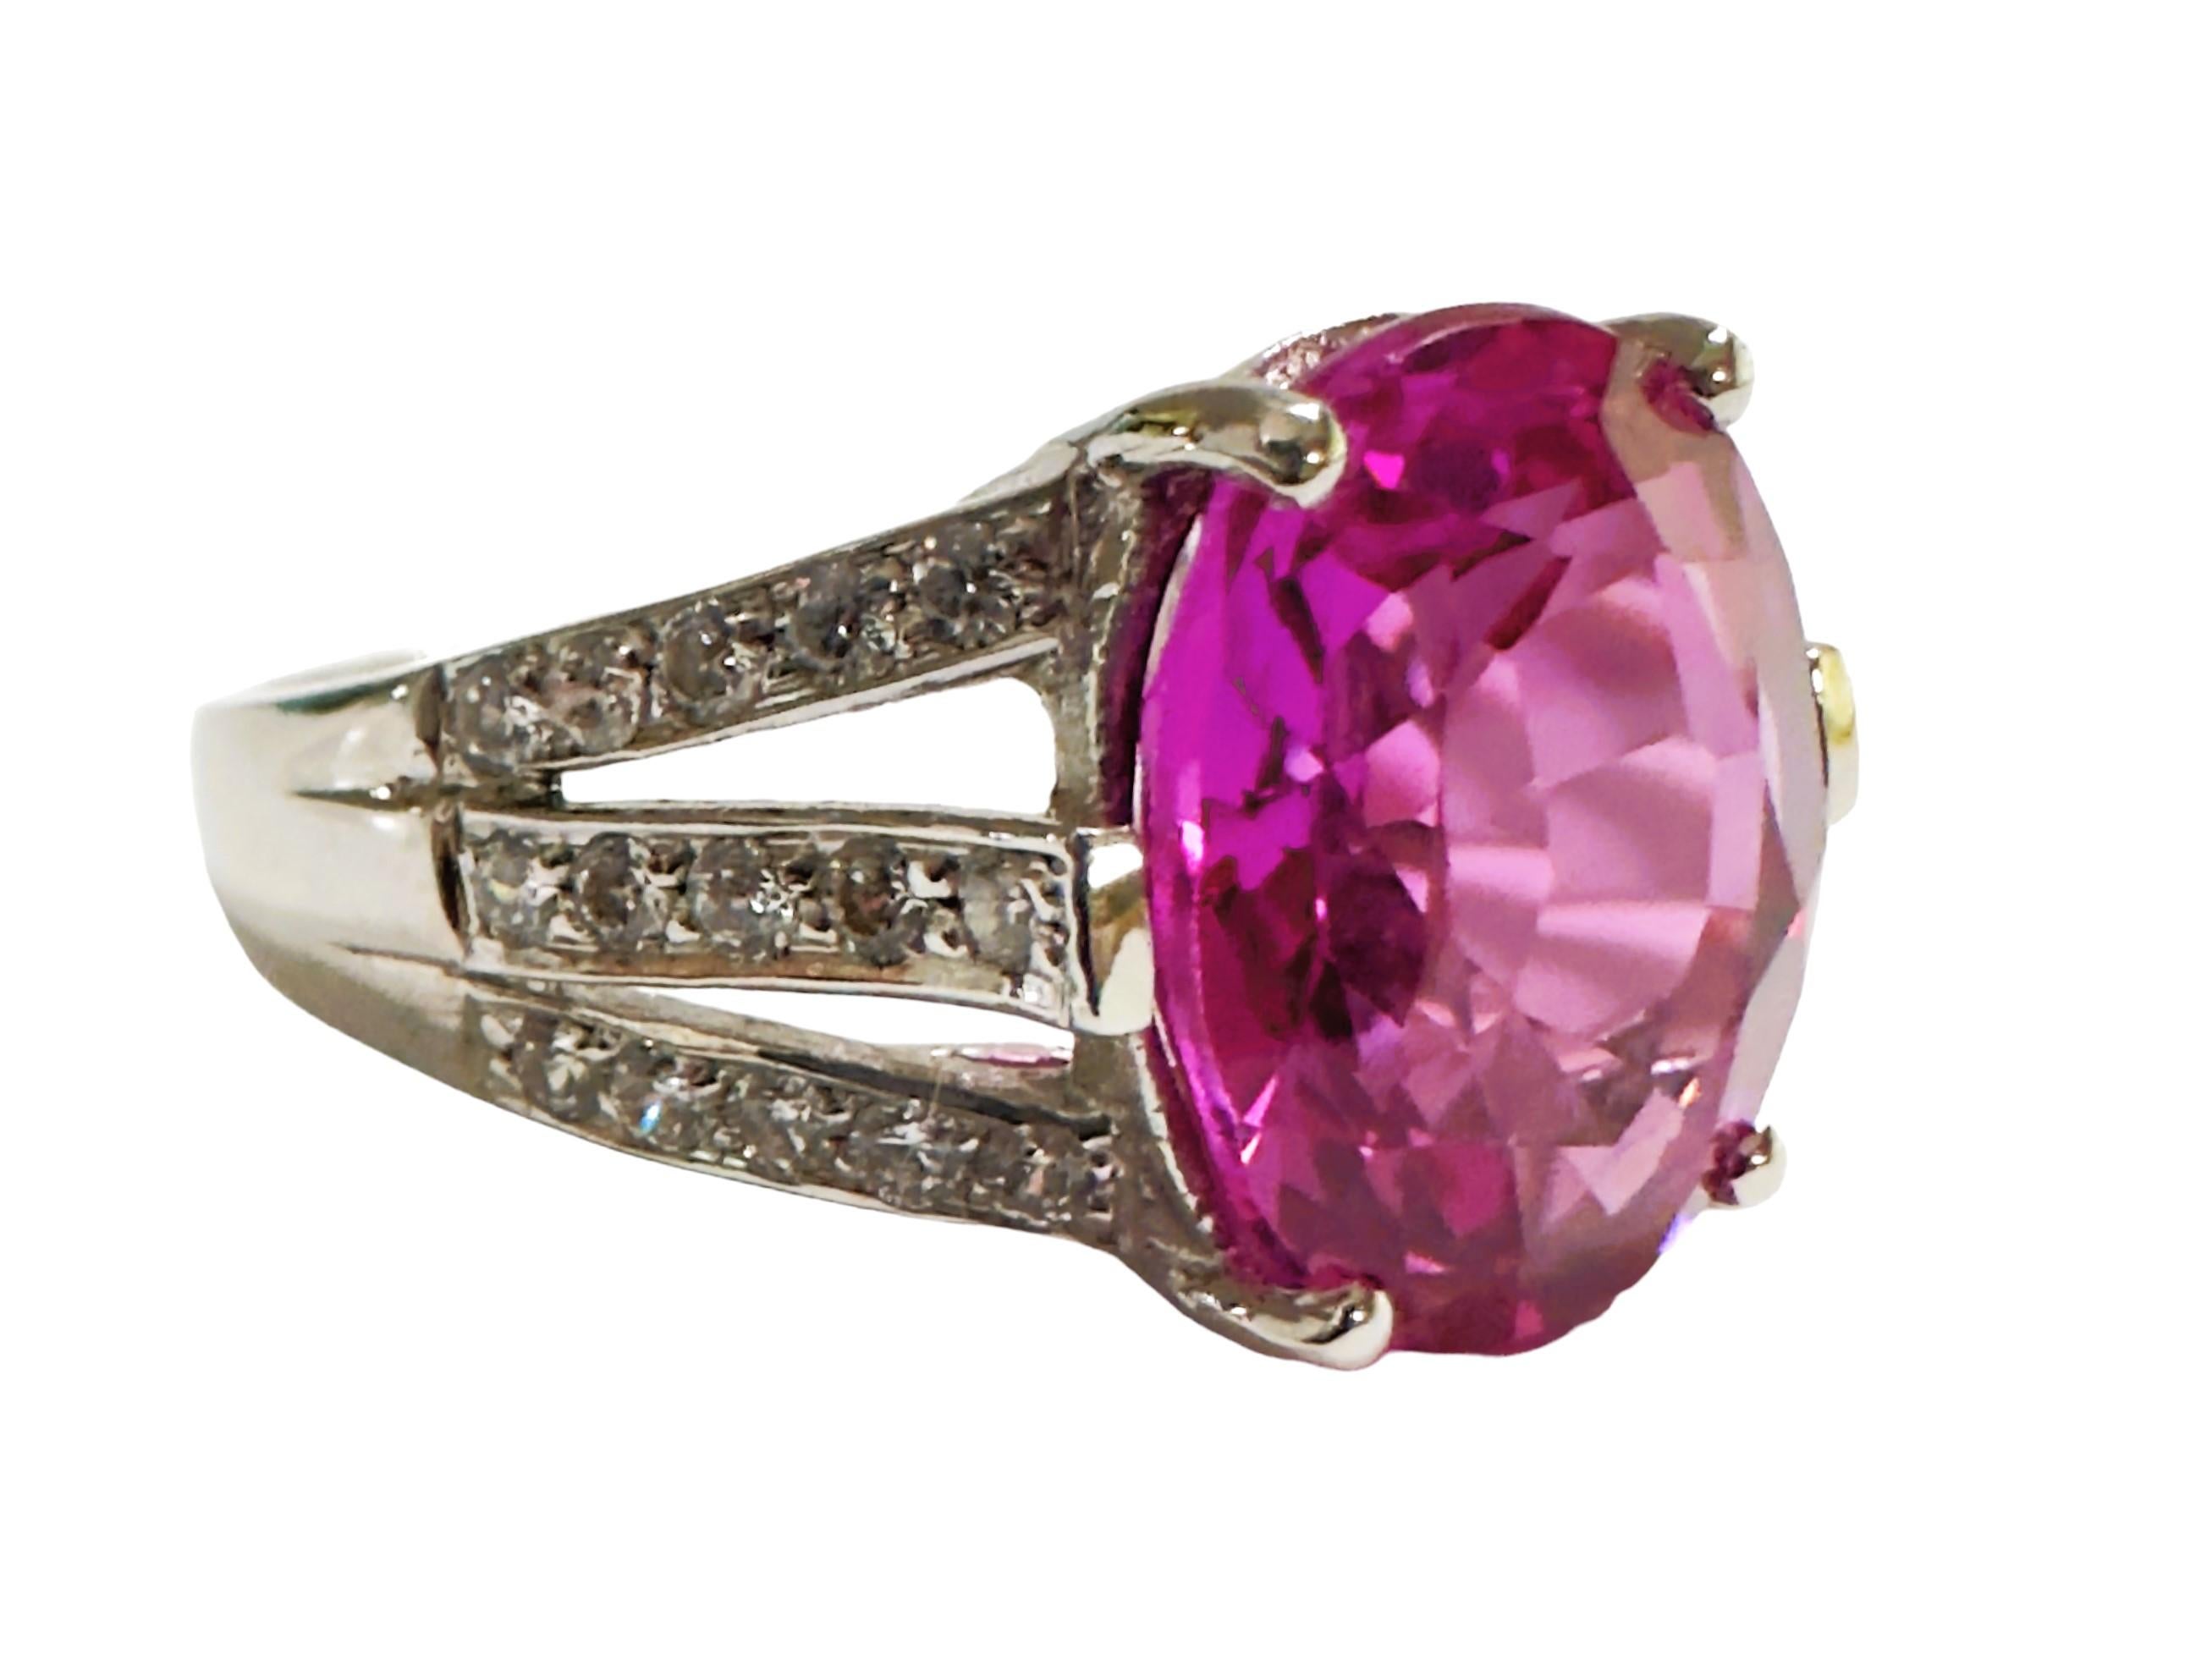 Women's New African 8.0 Ct Pink Sapphire Sterling Ring Size 6